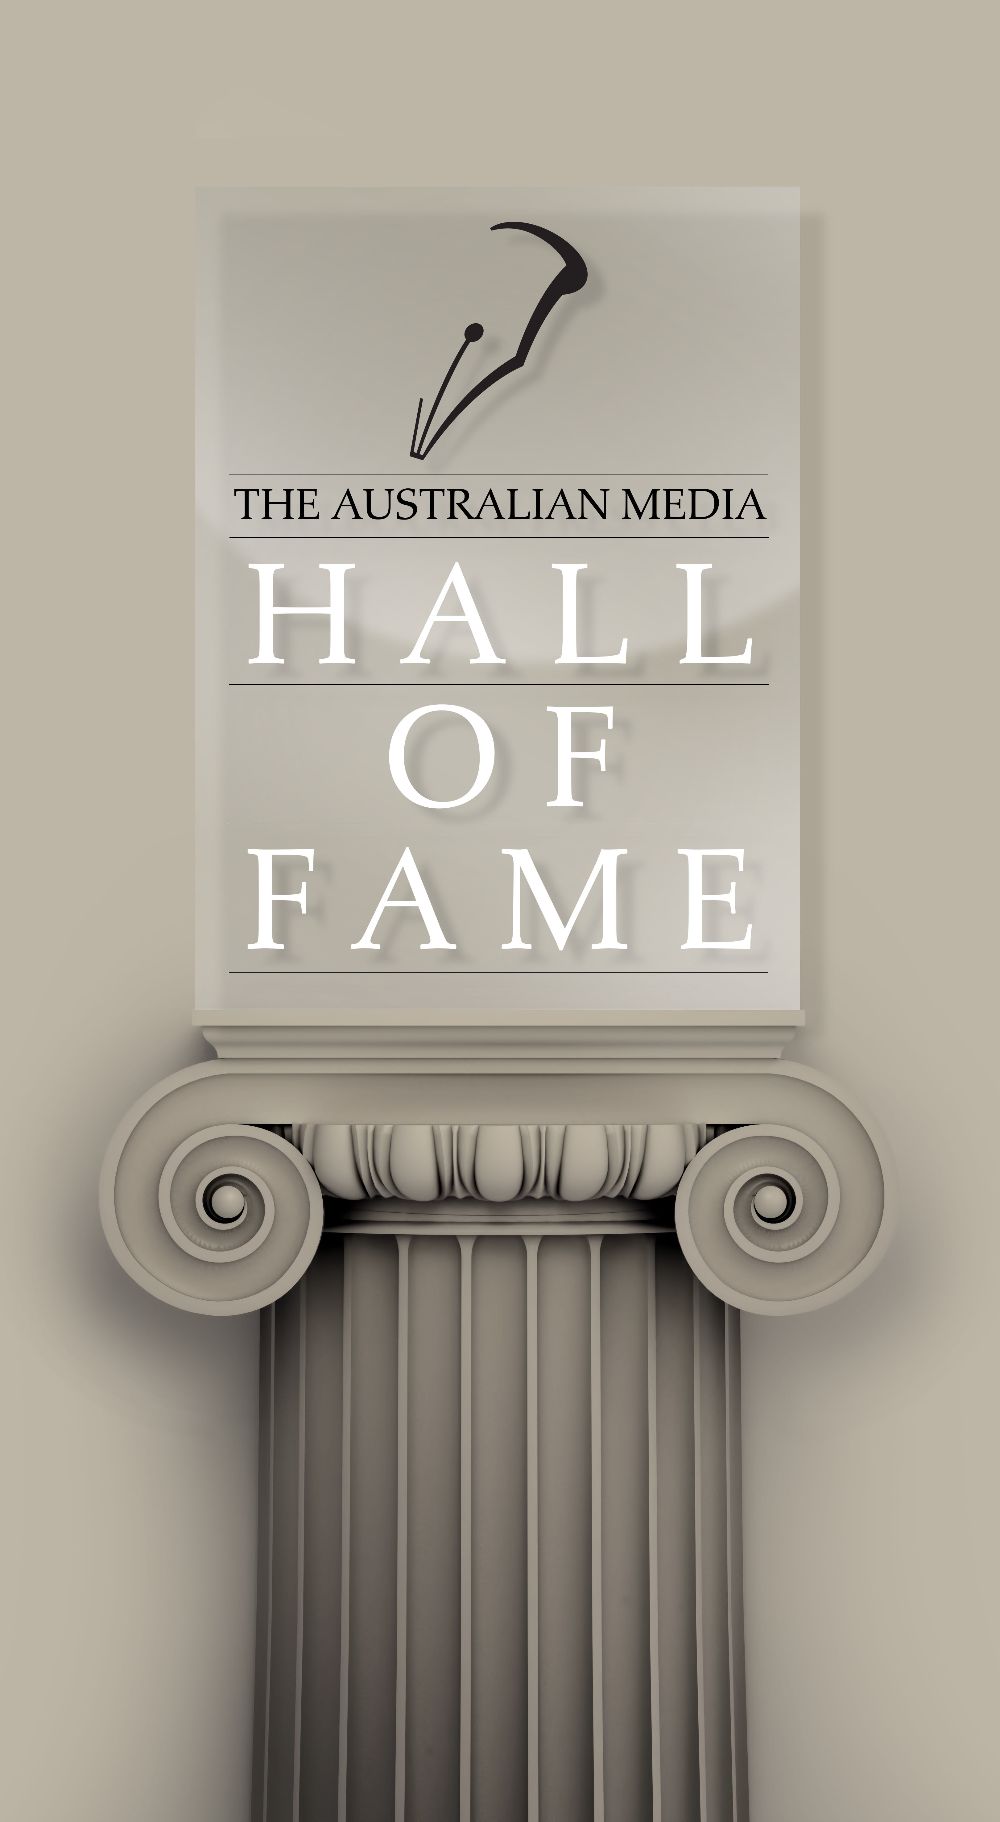 Click to enter the Australian Media Hall of Fame